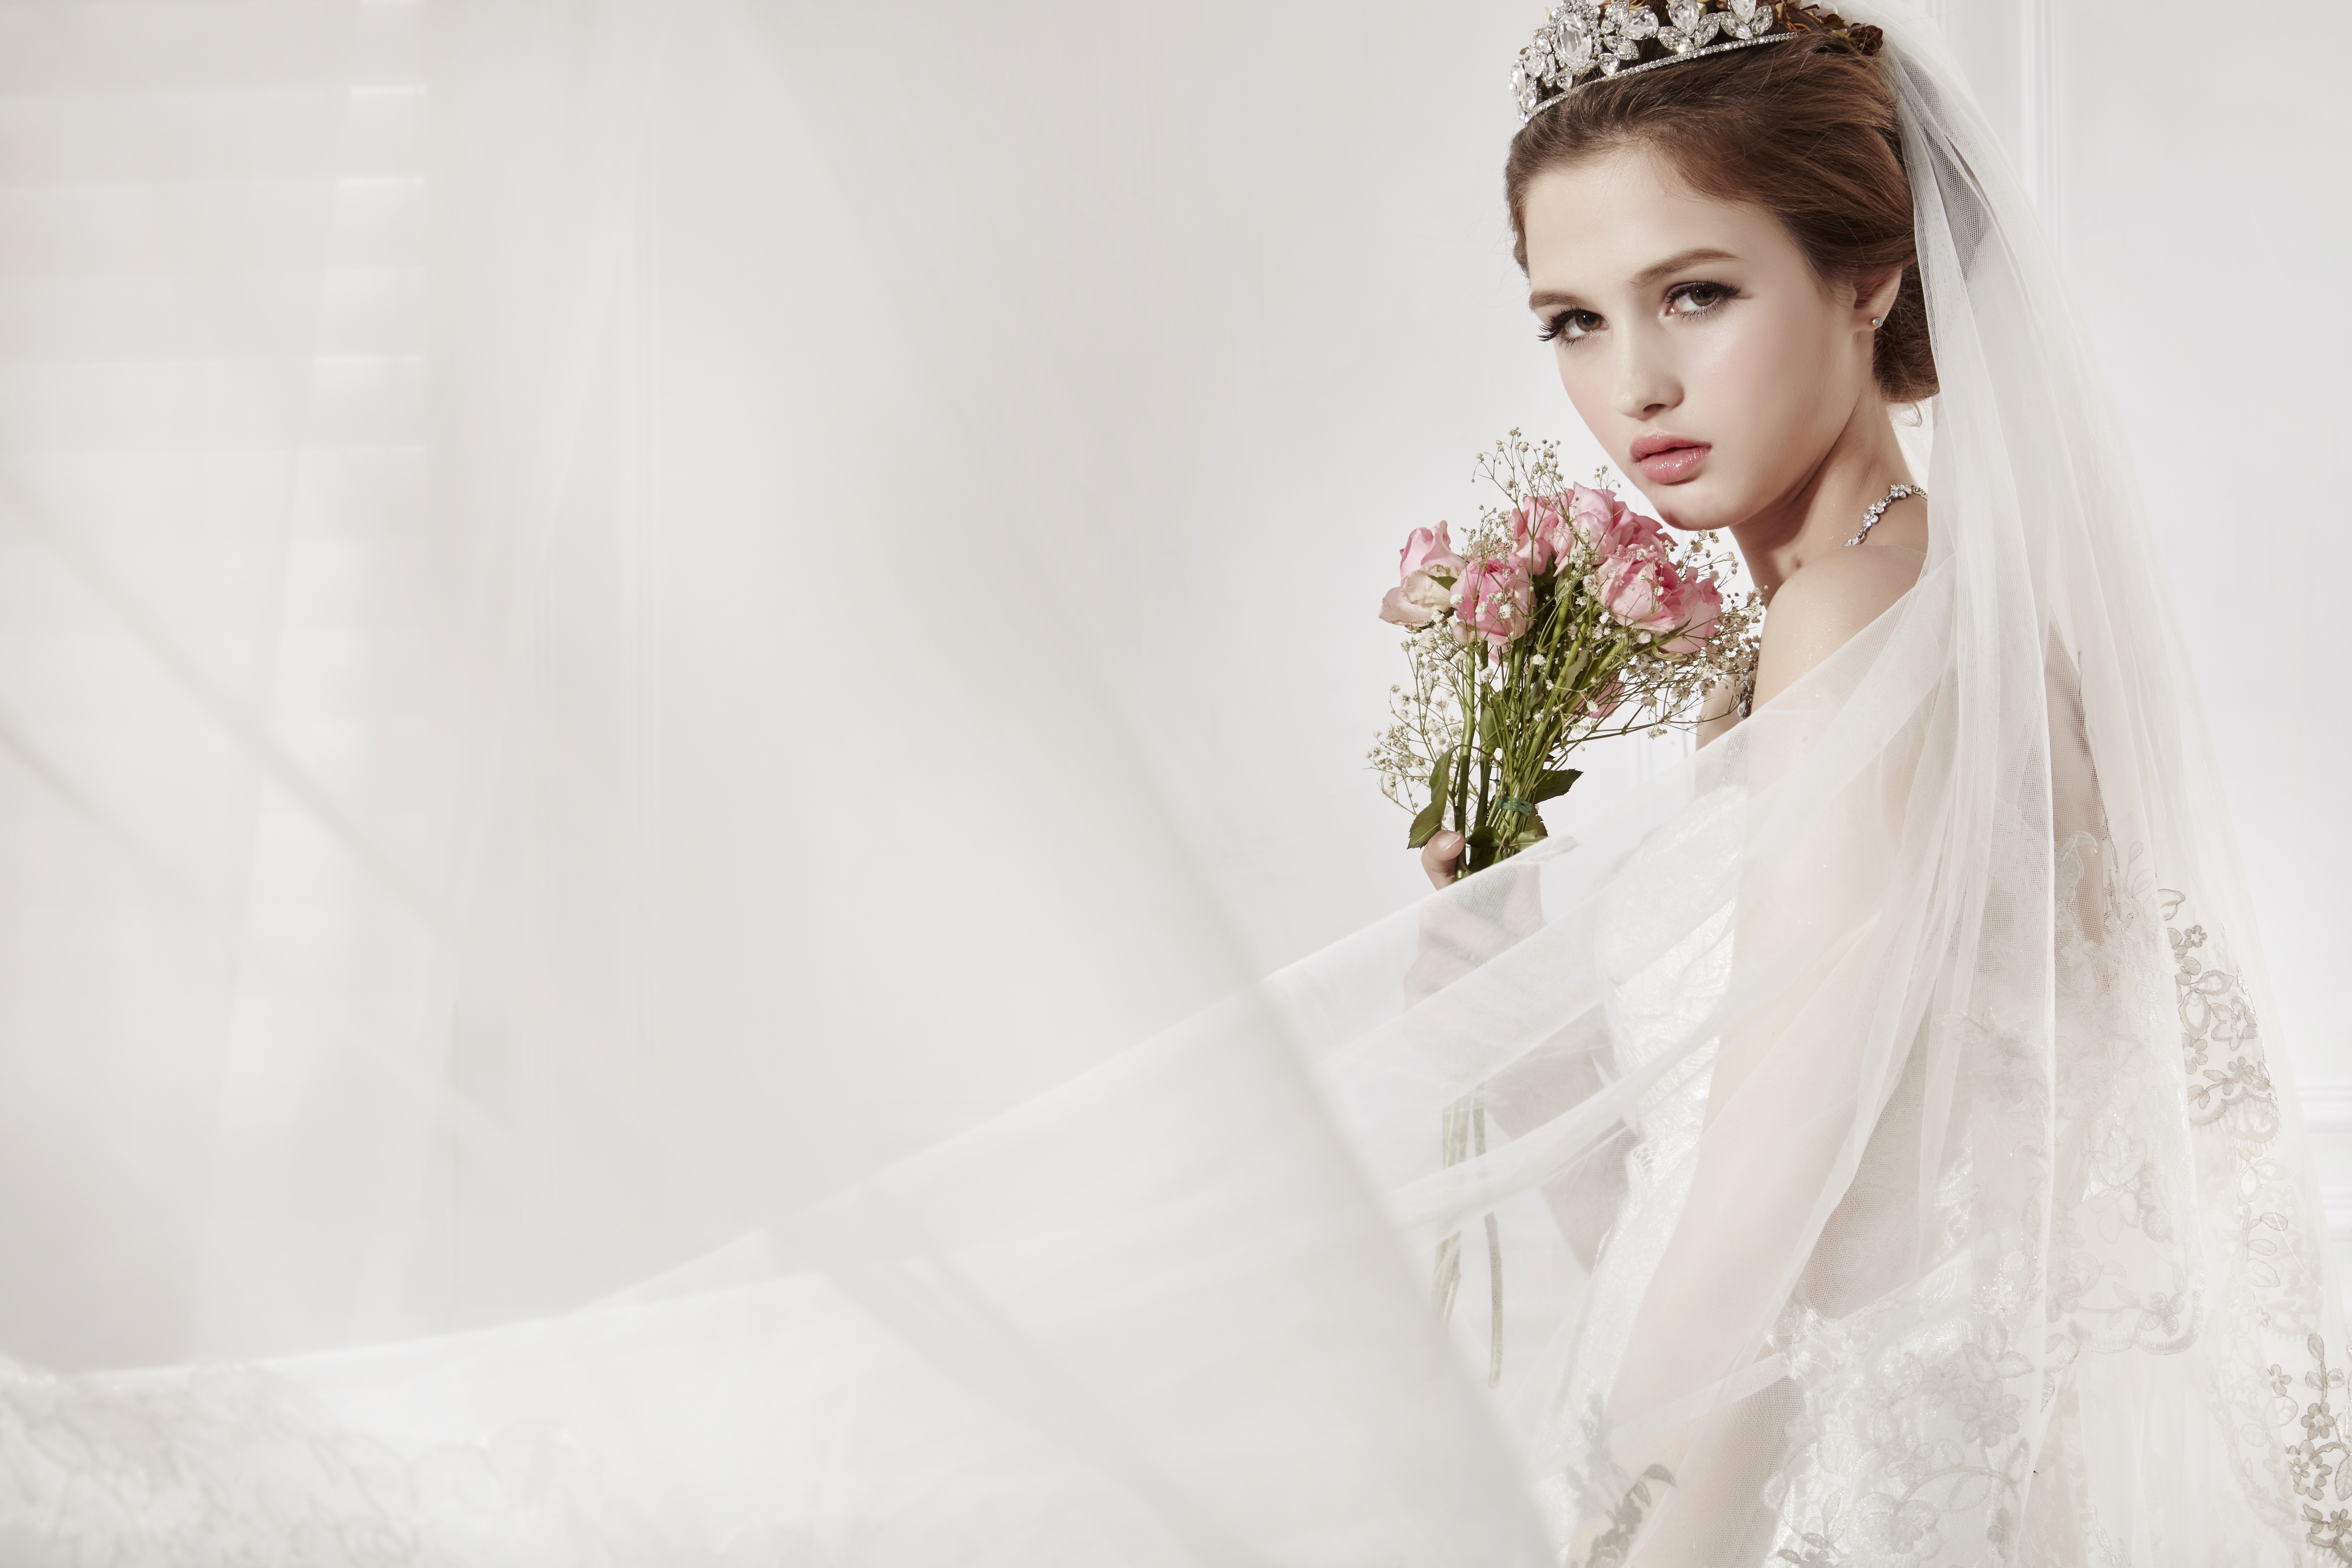 Bride 8k Ultra HD Wallpaper And Background